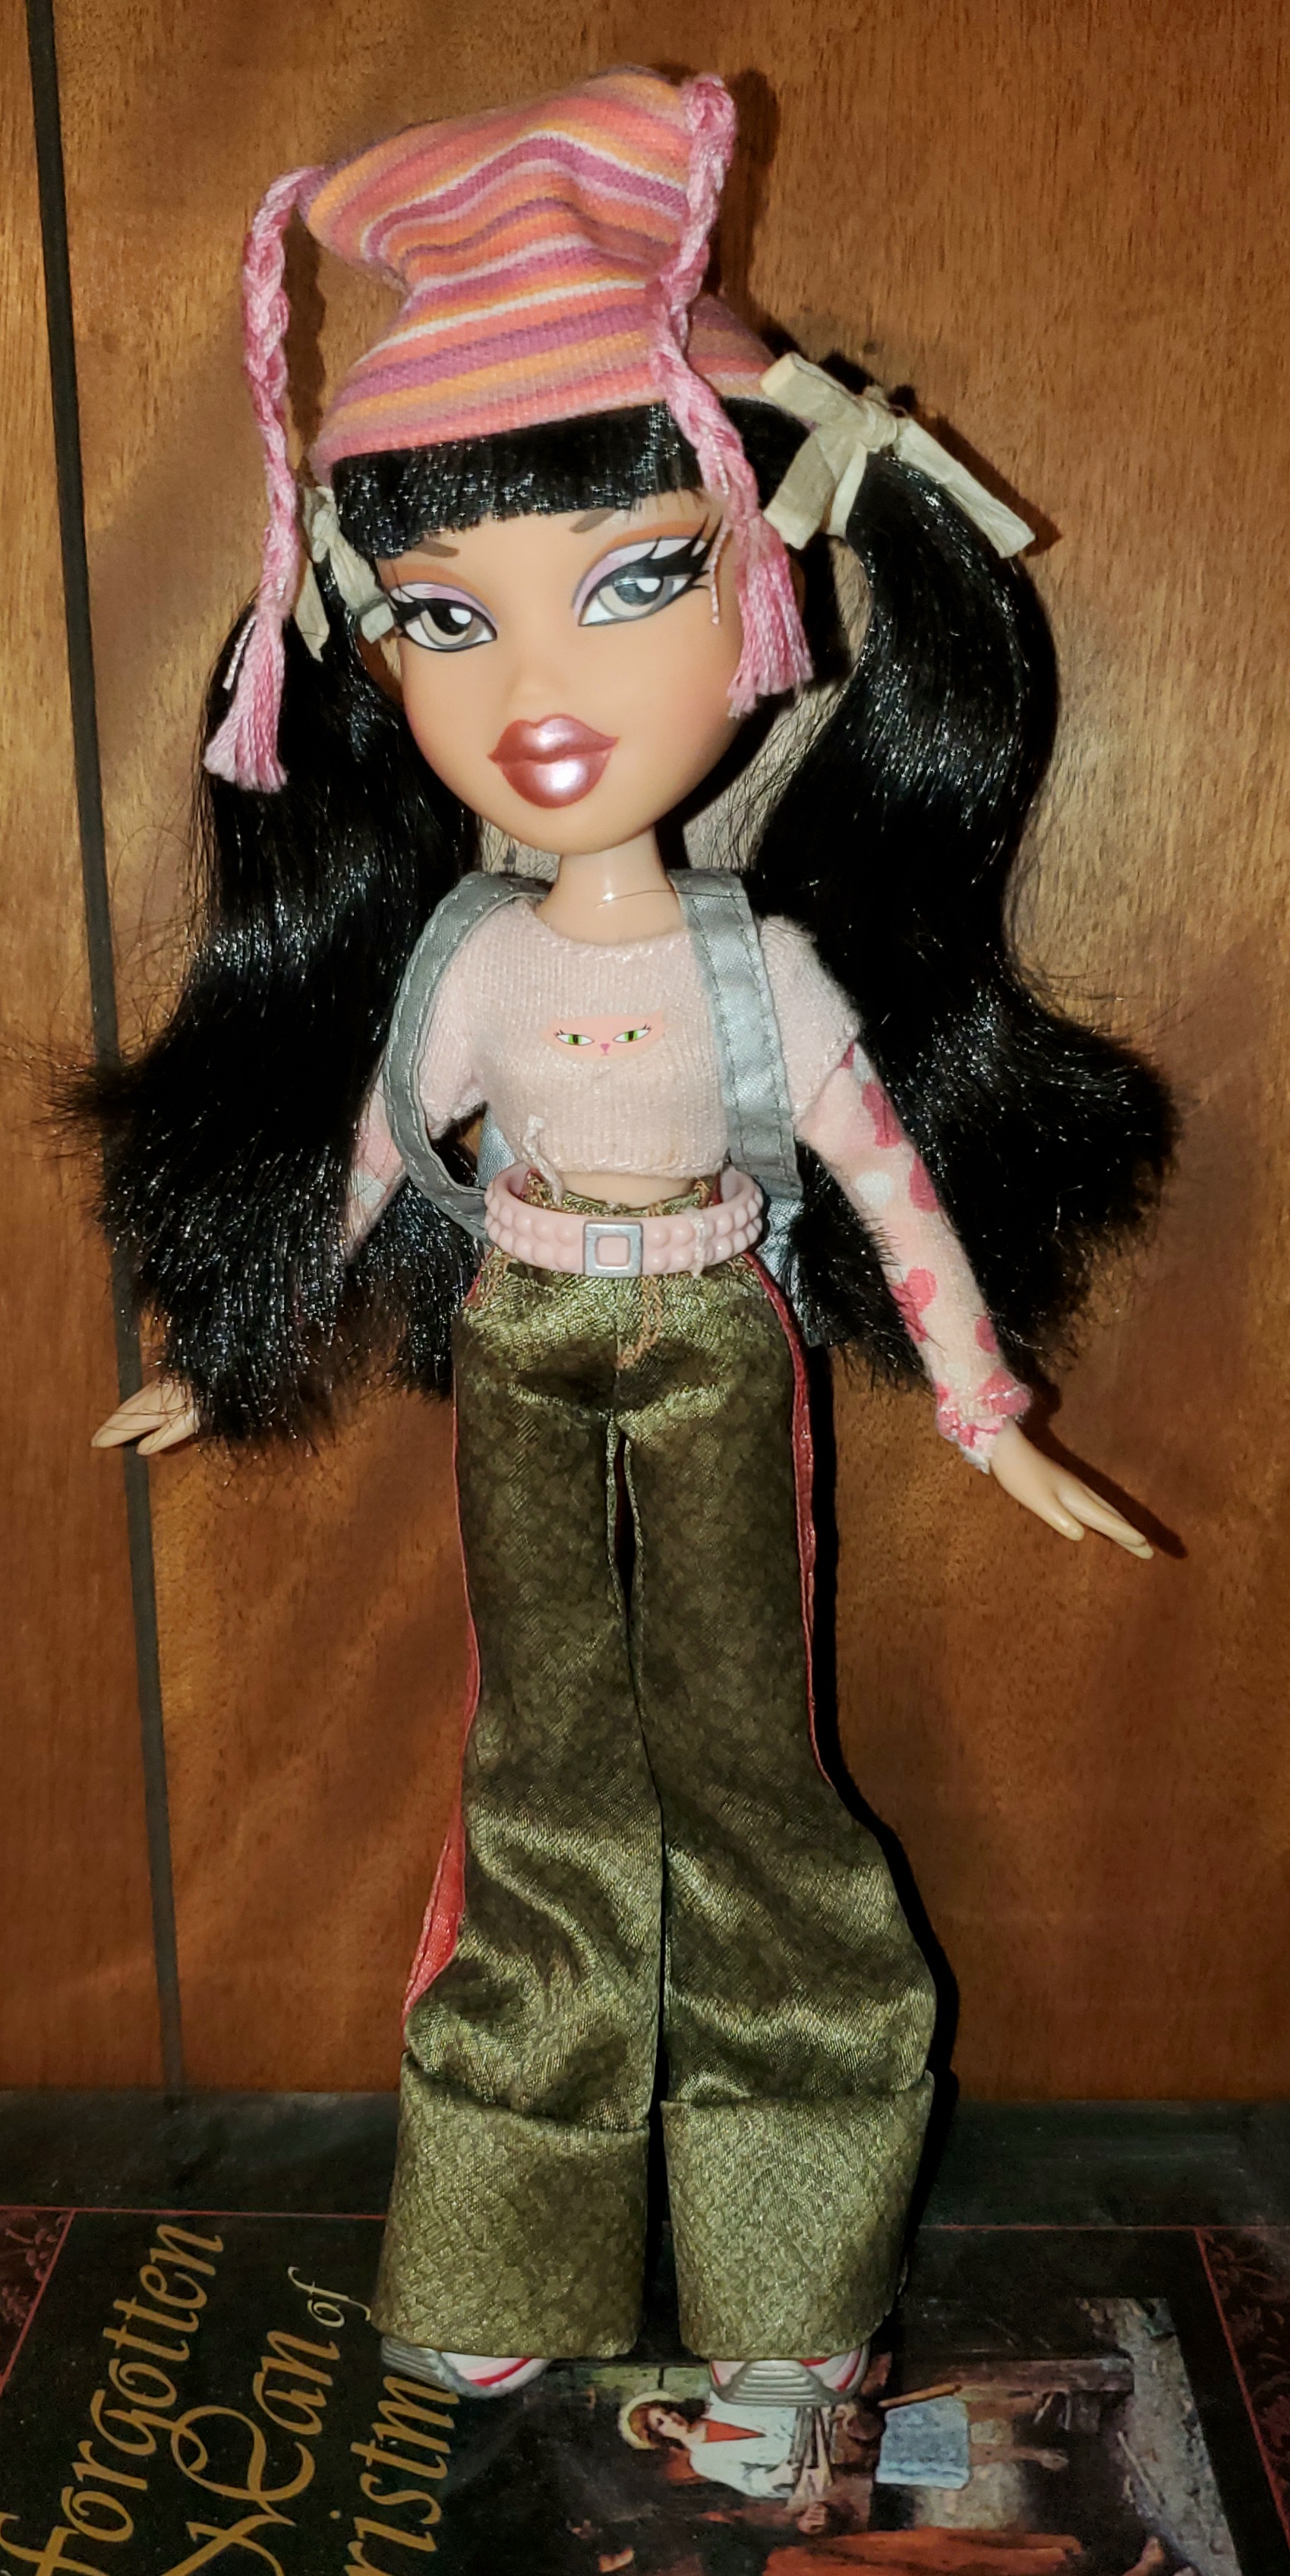 Confessions of a Dolly Lover: Sorry, it's another Bratz post, LOL!